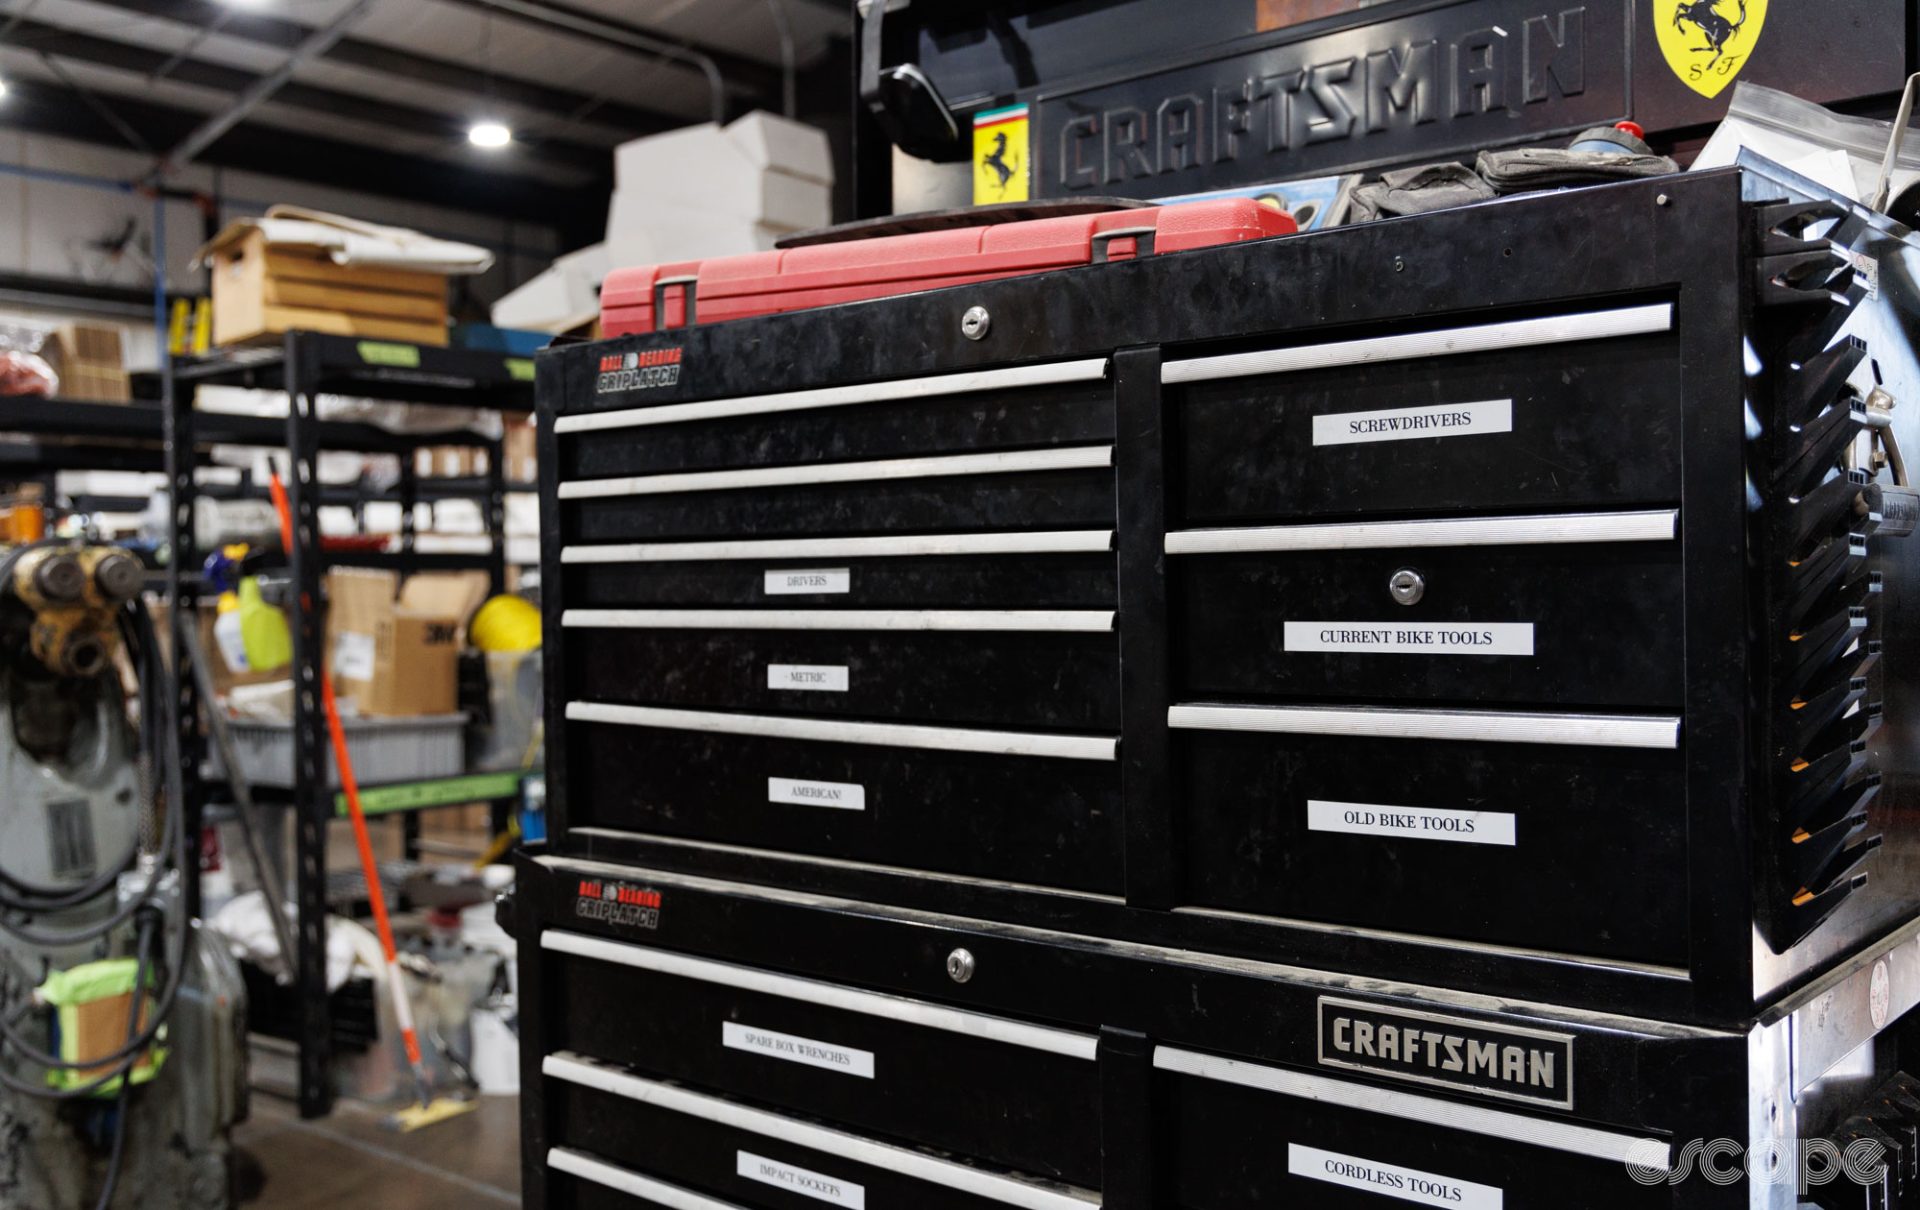 A large tool chest from Craftsman features rows of drawers labeled with various kinds of tools inside.